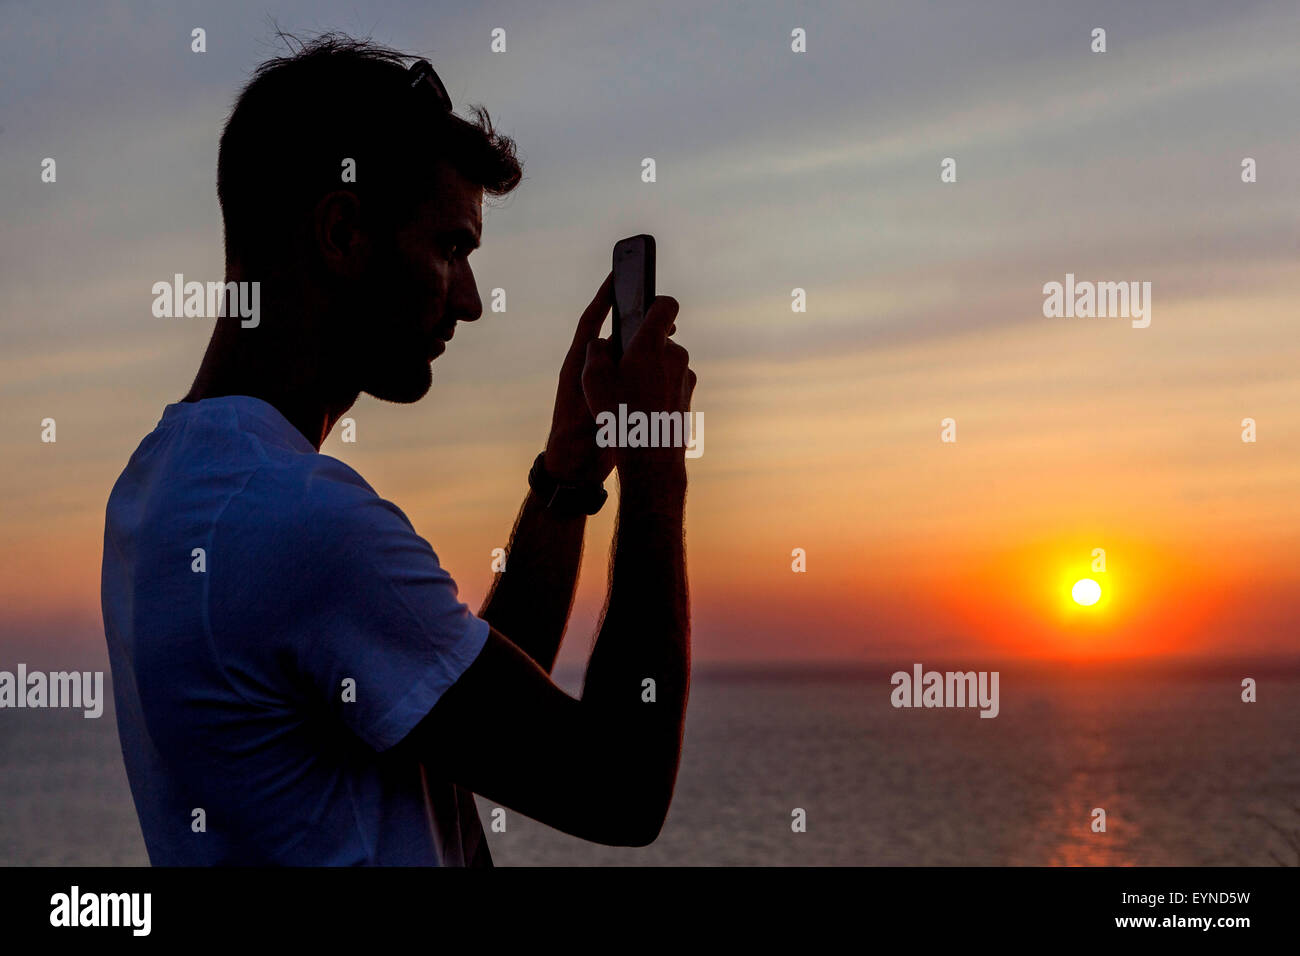 A young man taking a photo on mobile phone, Sunset Oia Santorini sunset Greece side silhouette person Stock Photo